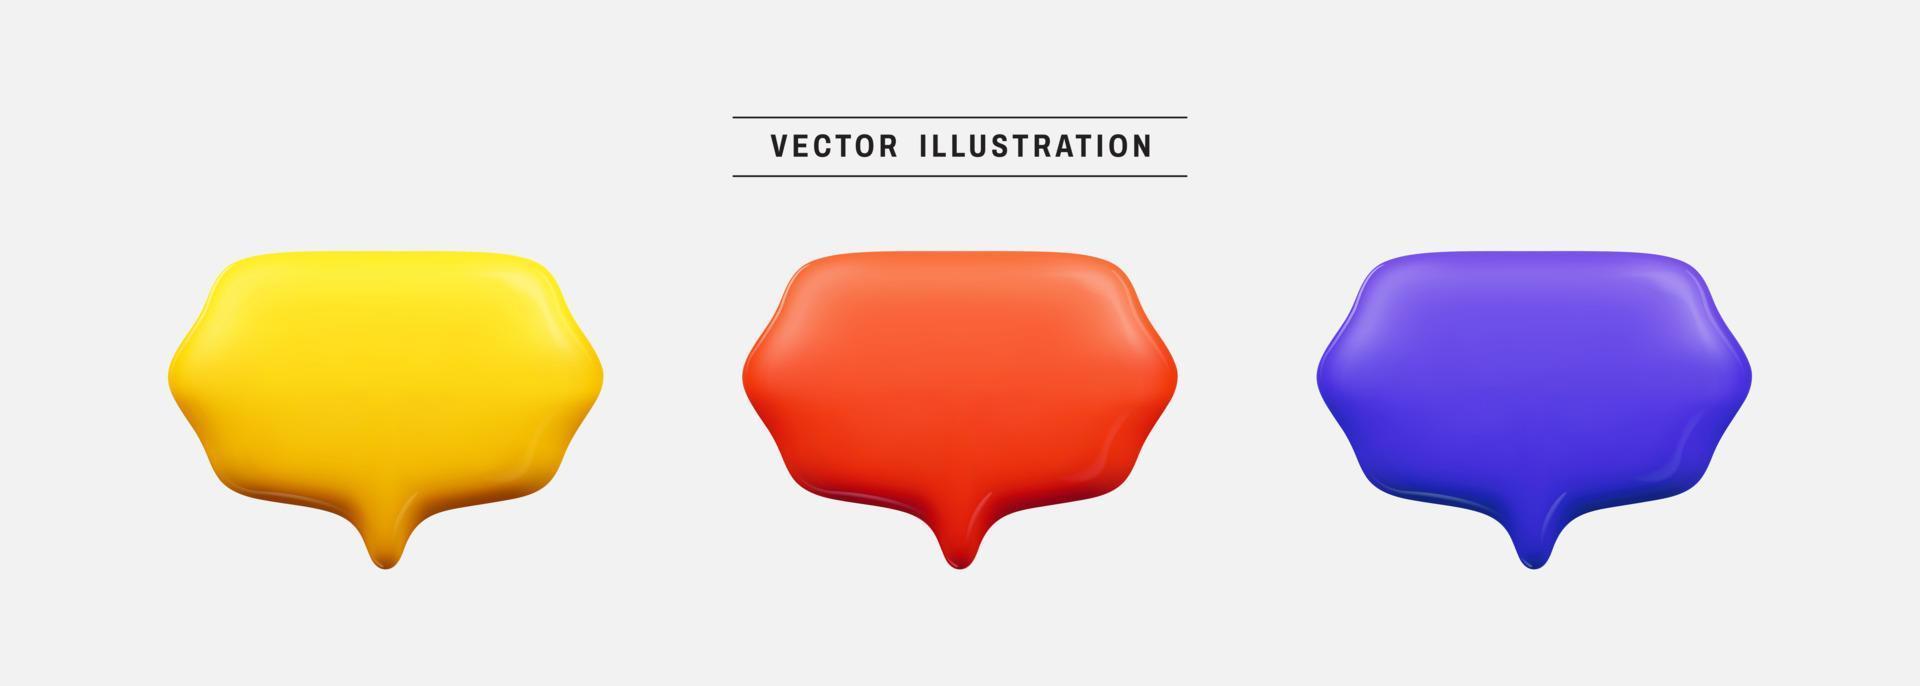 Speech bubble 3d icon set. realistic design elements collection. vector illustration in cartoon minimal style